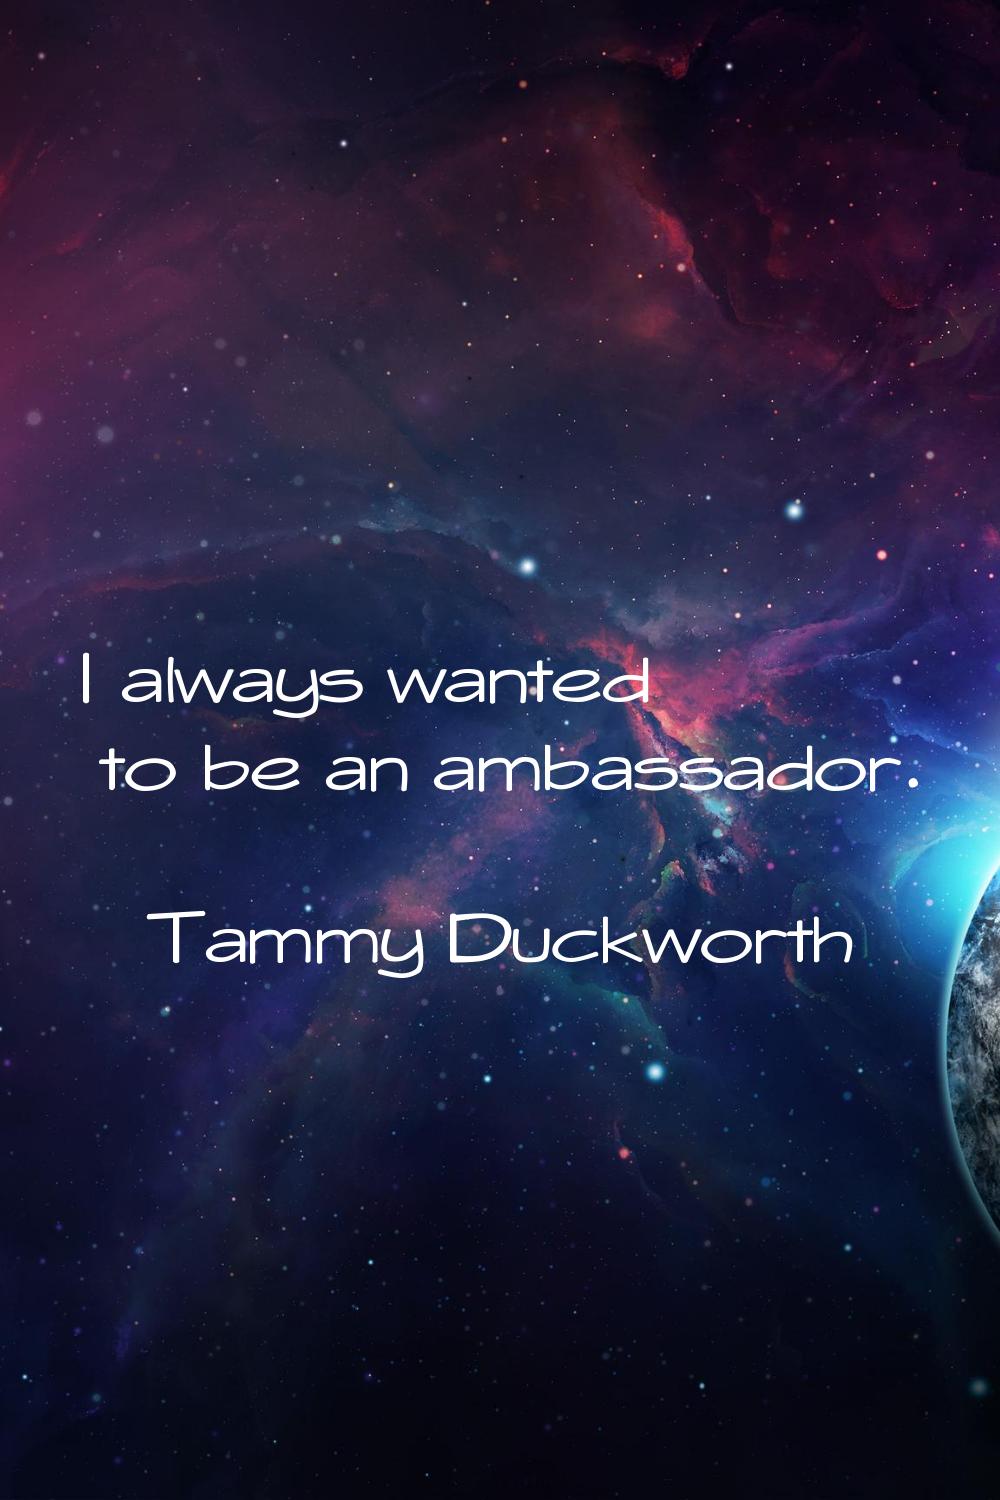 I always wanted to be an ambassador.